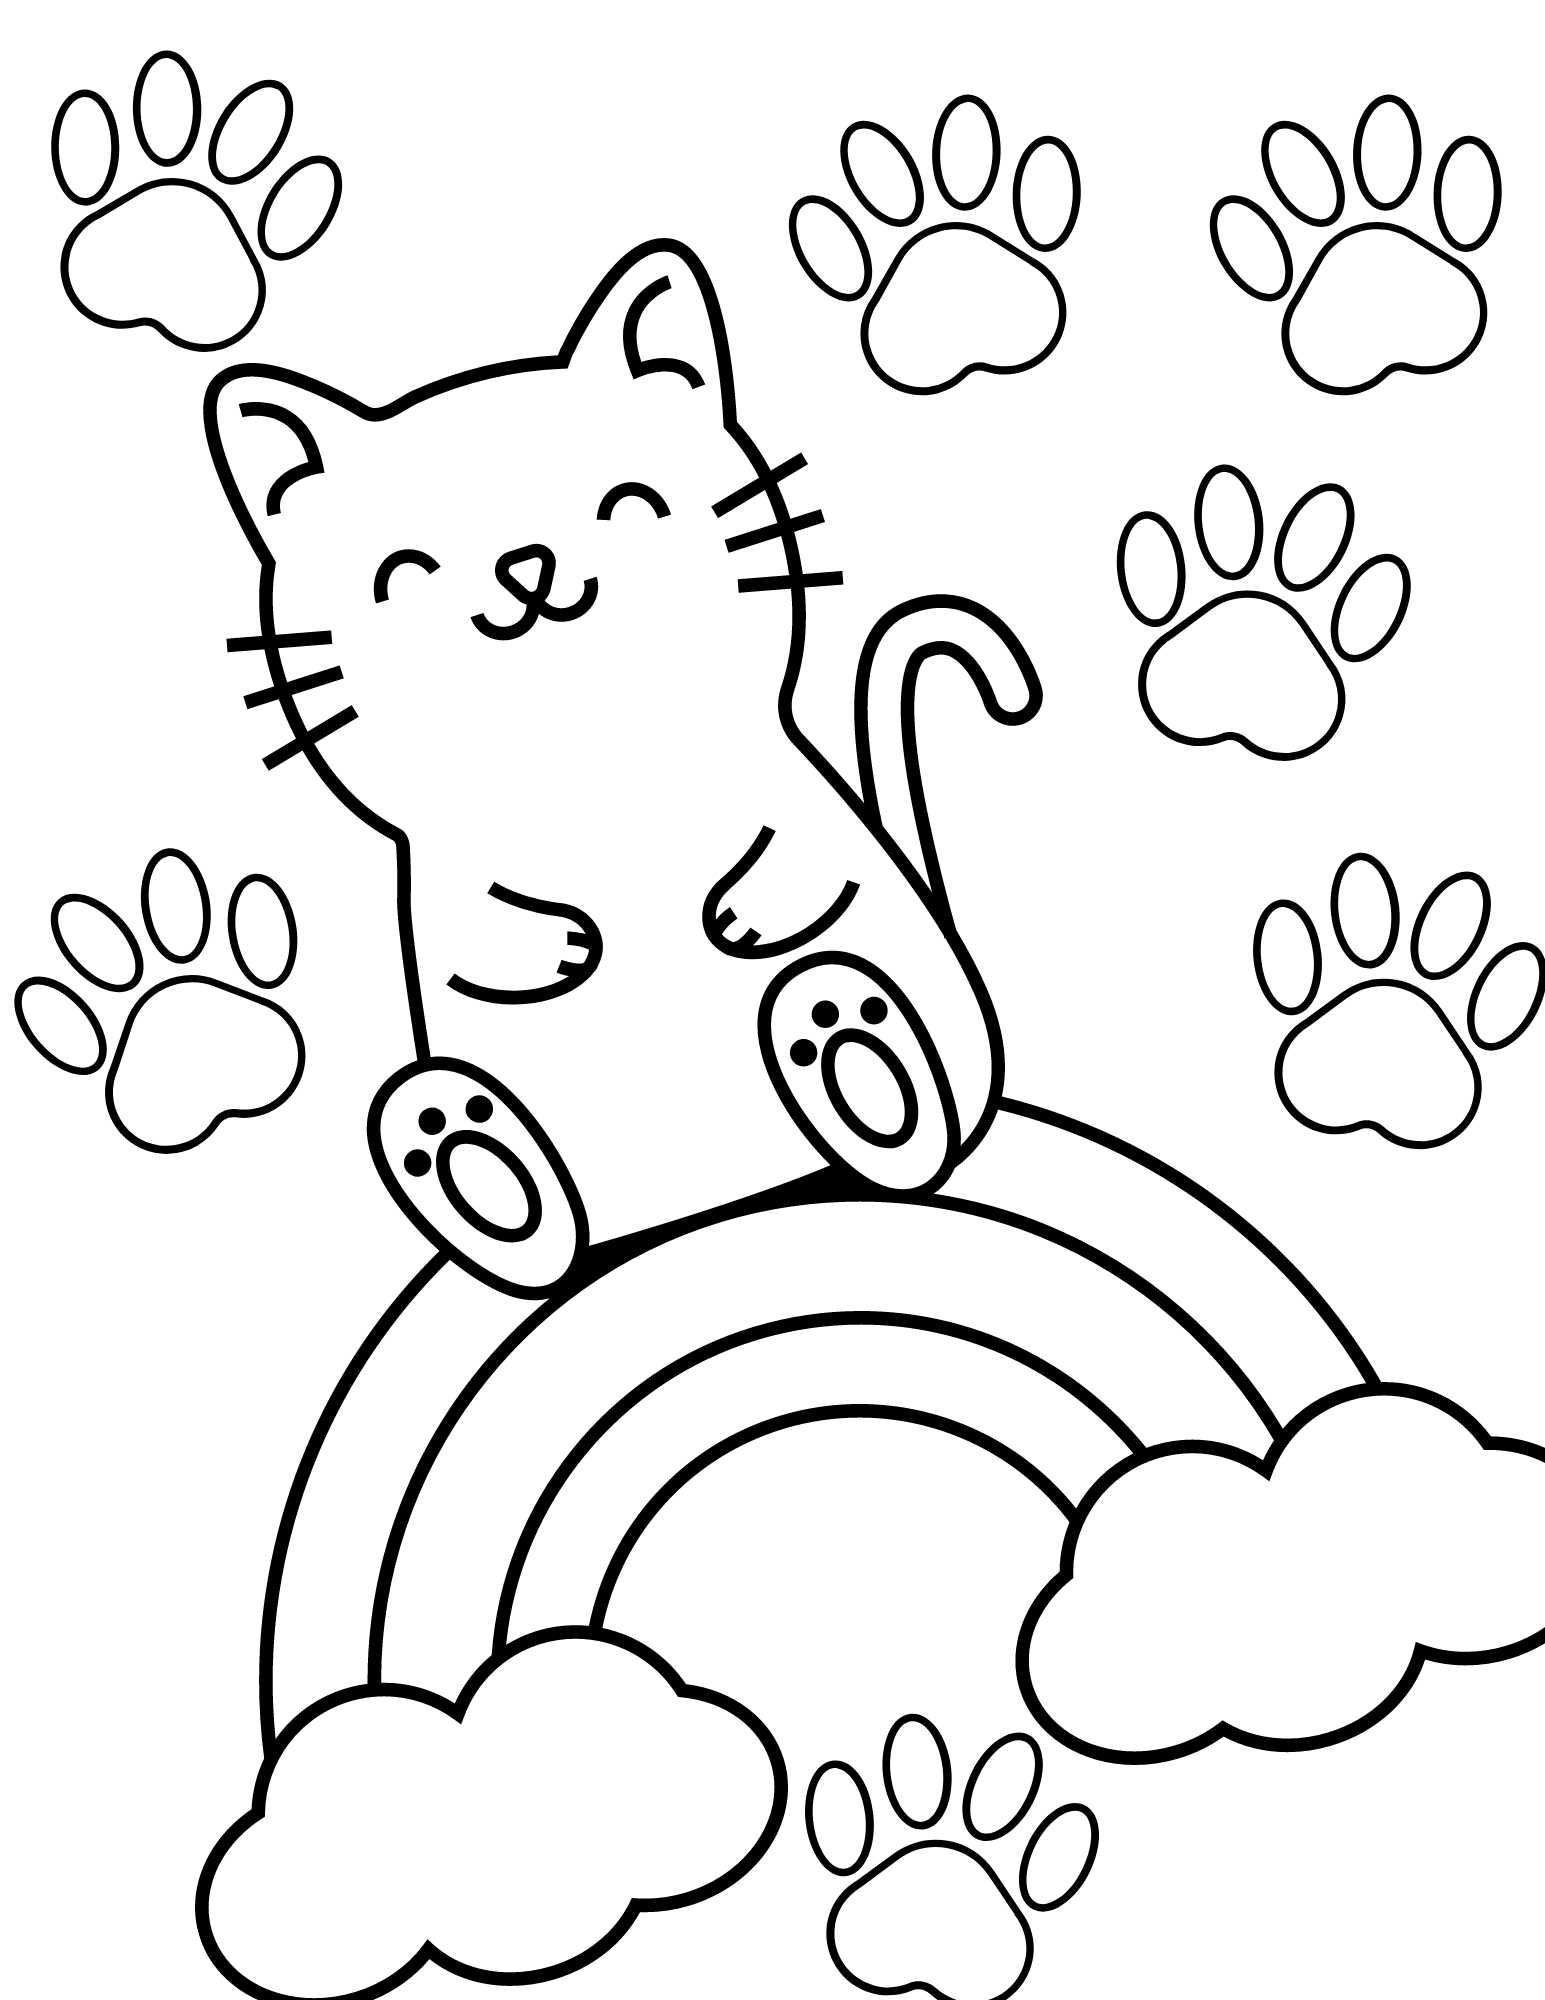 Free printable cat coloring pages for kids and adults